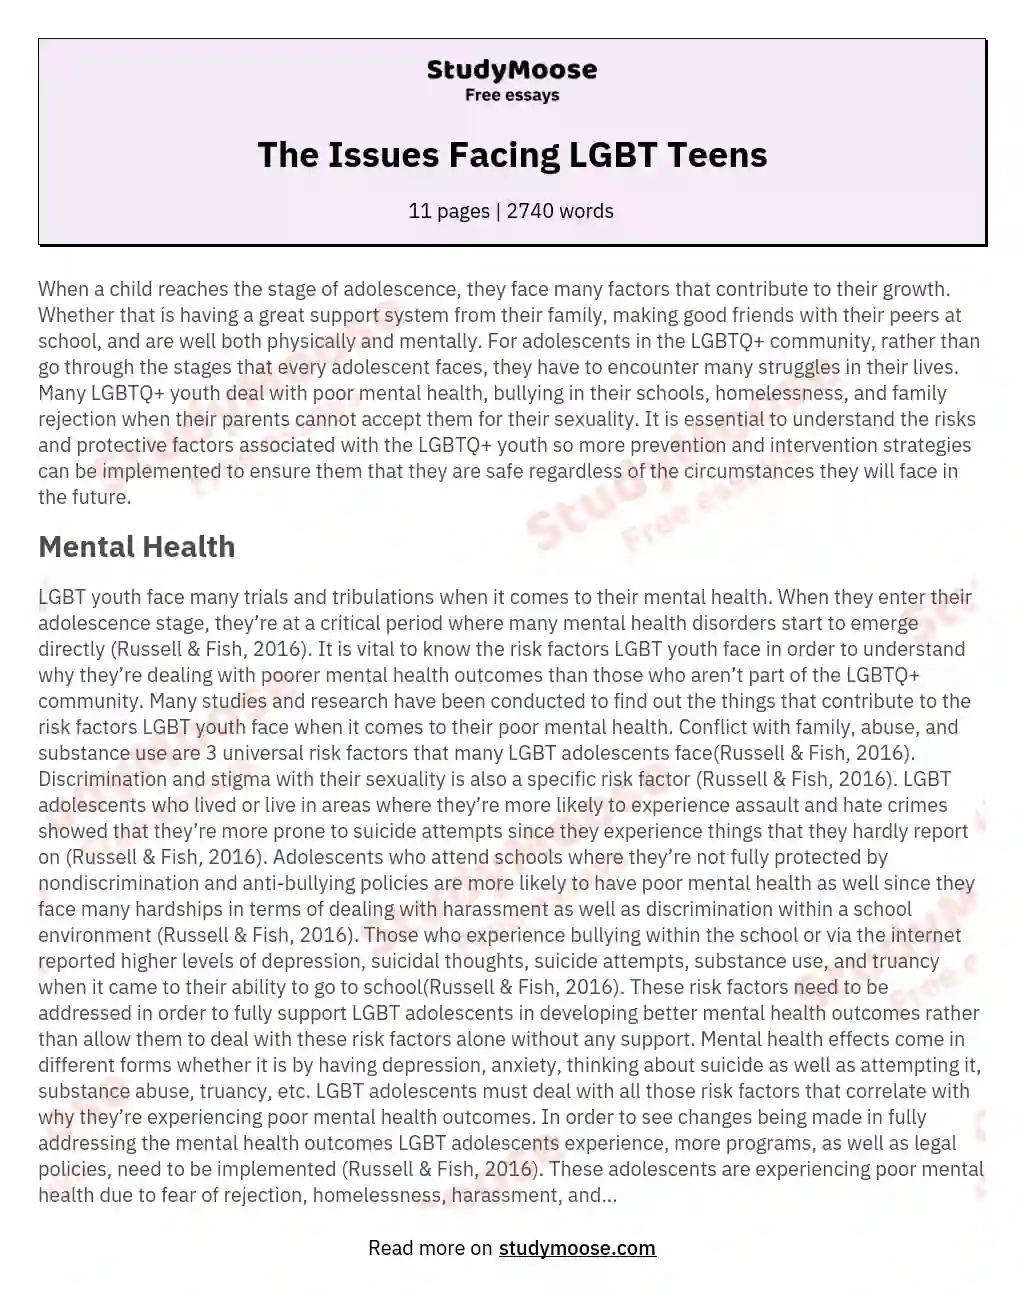 The Issues Facing LGBT Teens essay